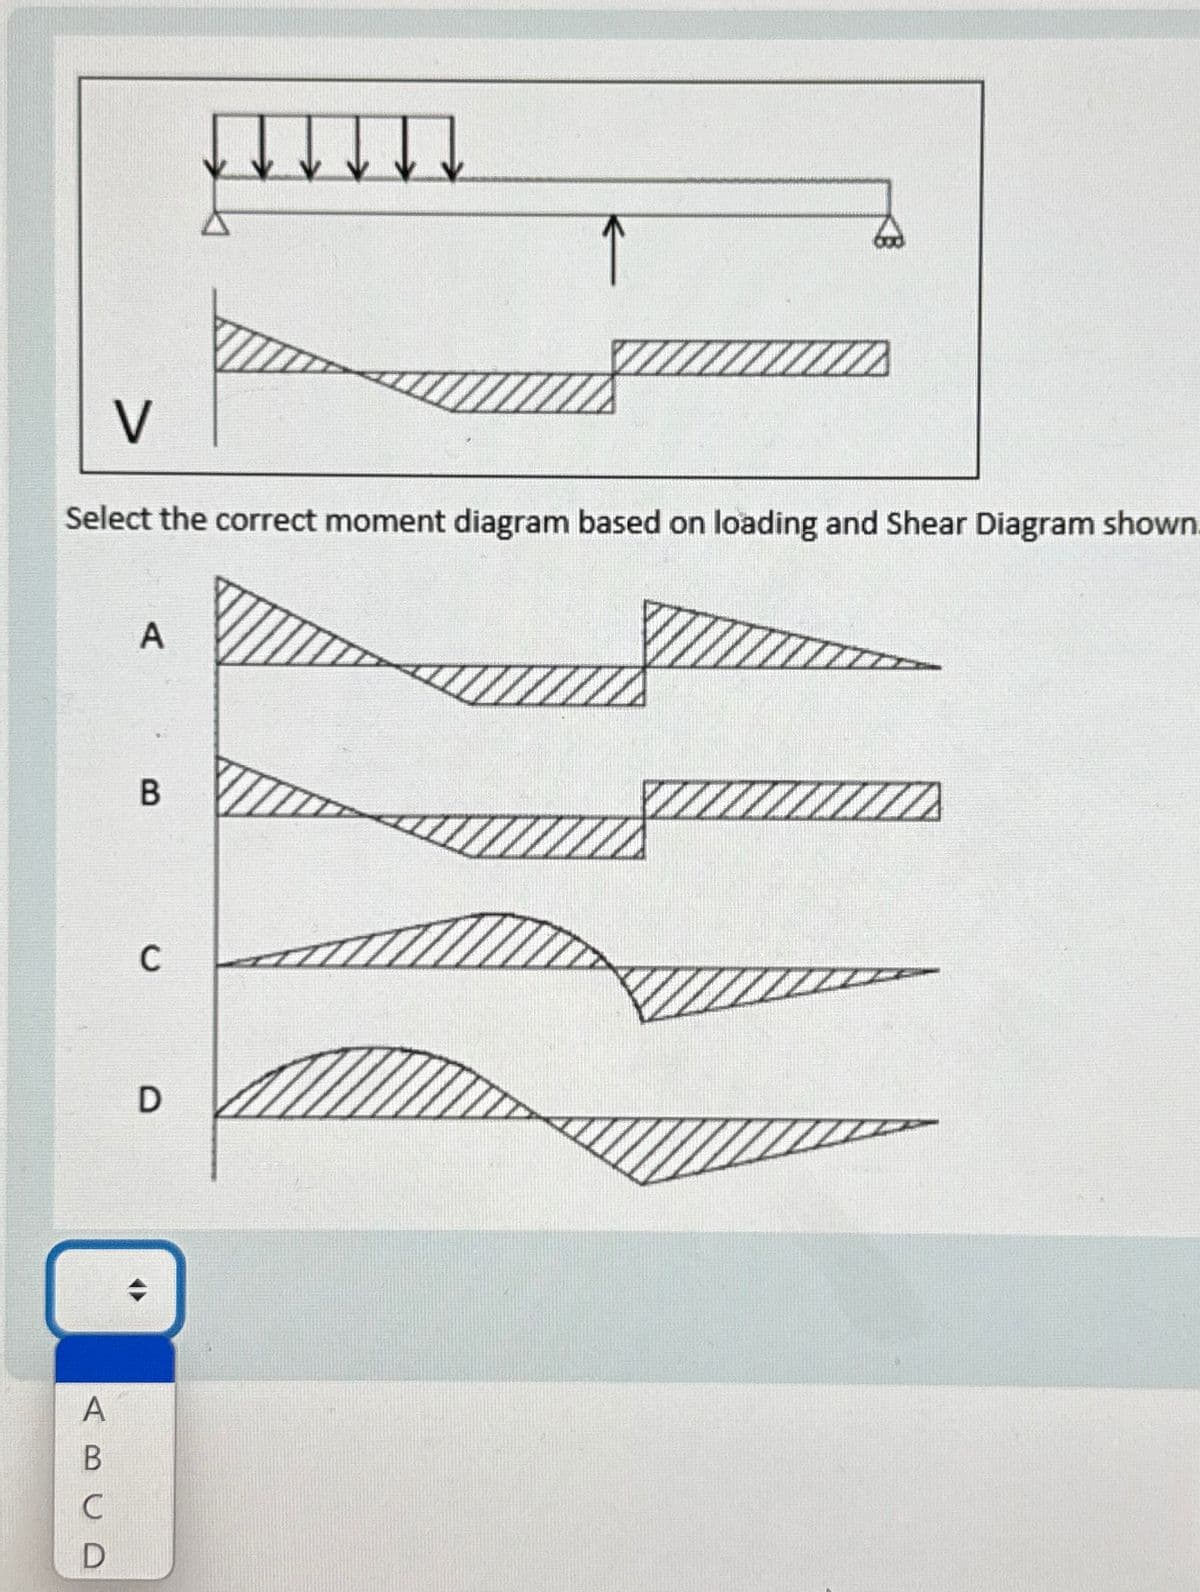 V
Select the correct moment diagram based on loading and Shear Diagram shown
A
B
C
D
ABCD